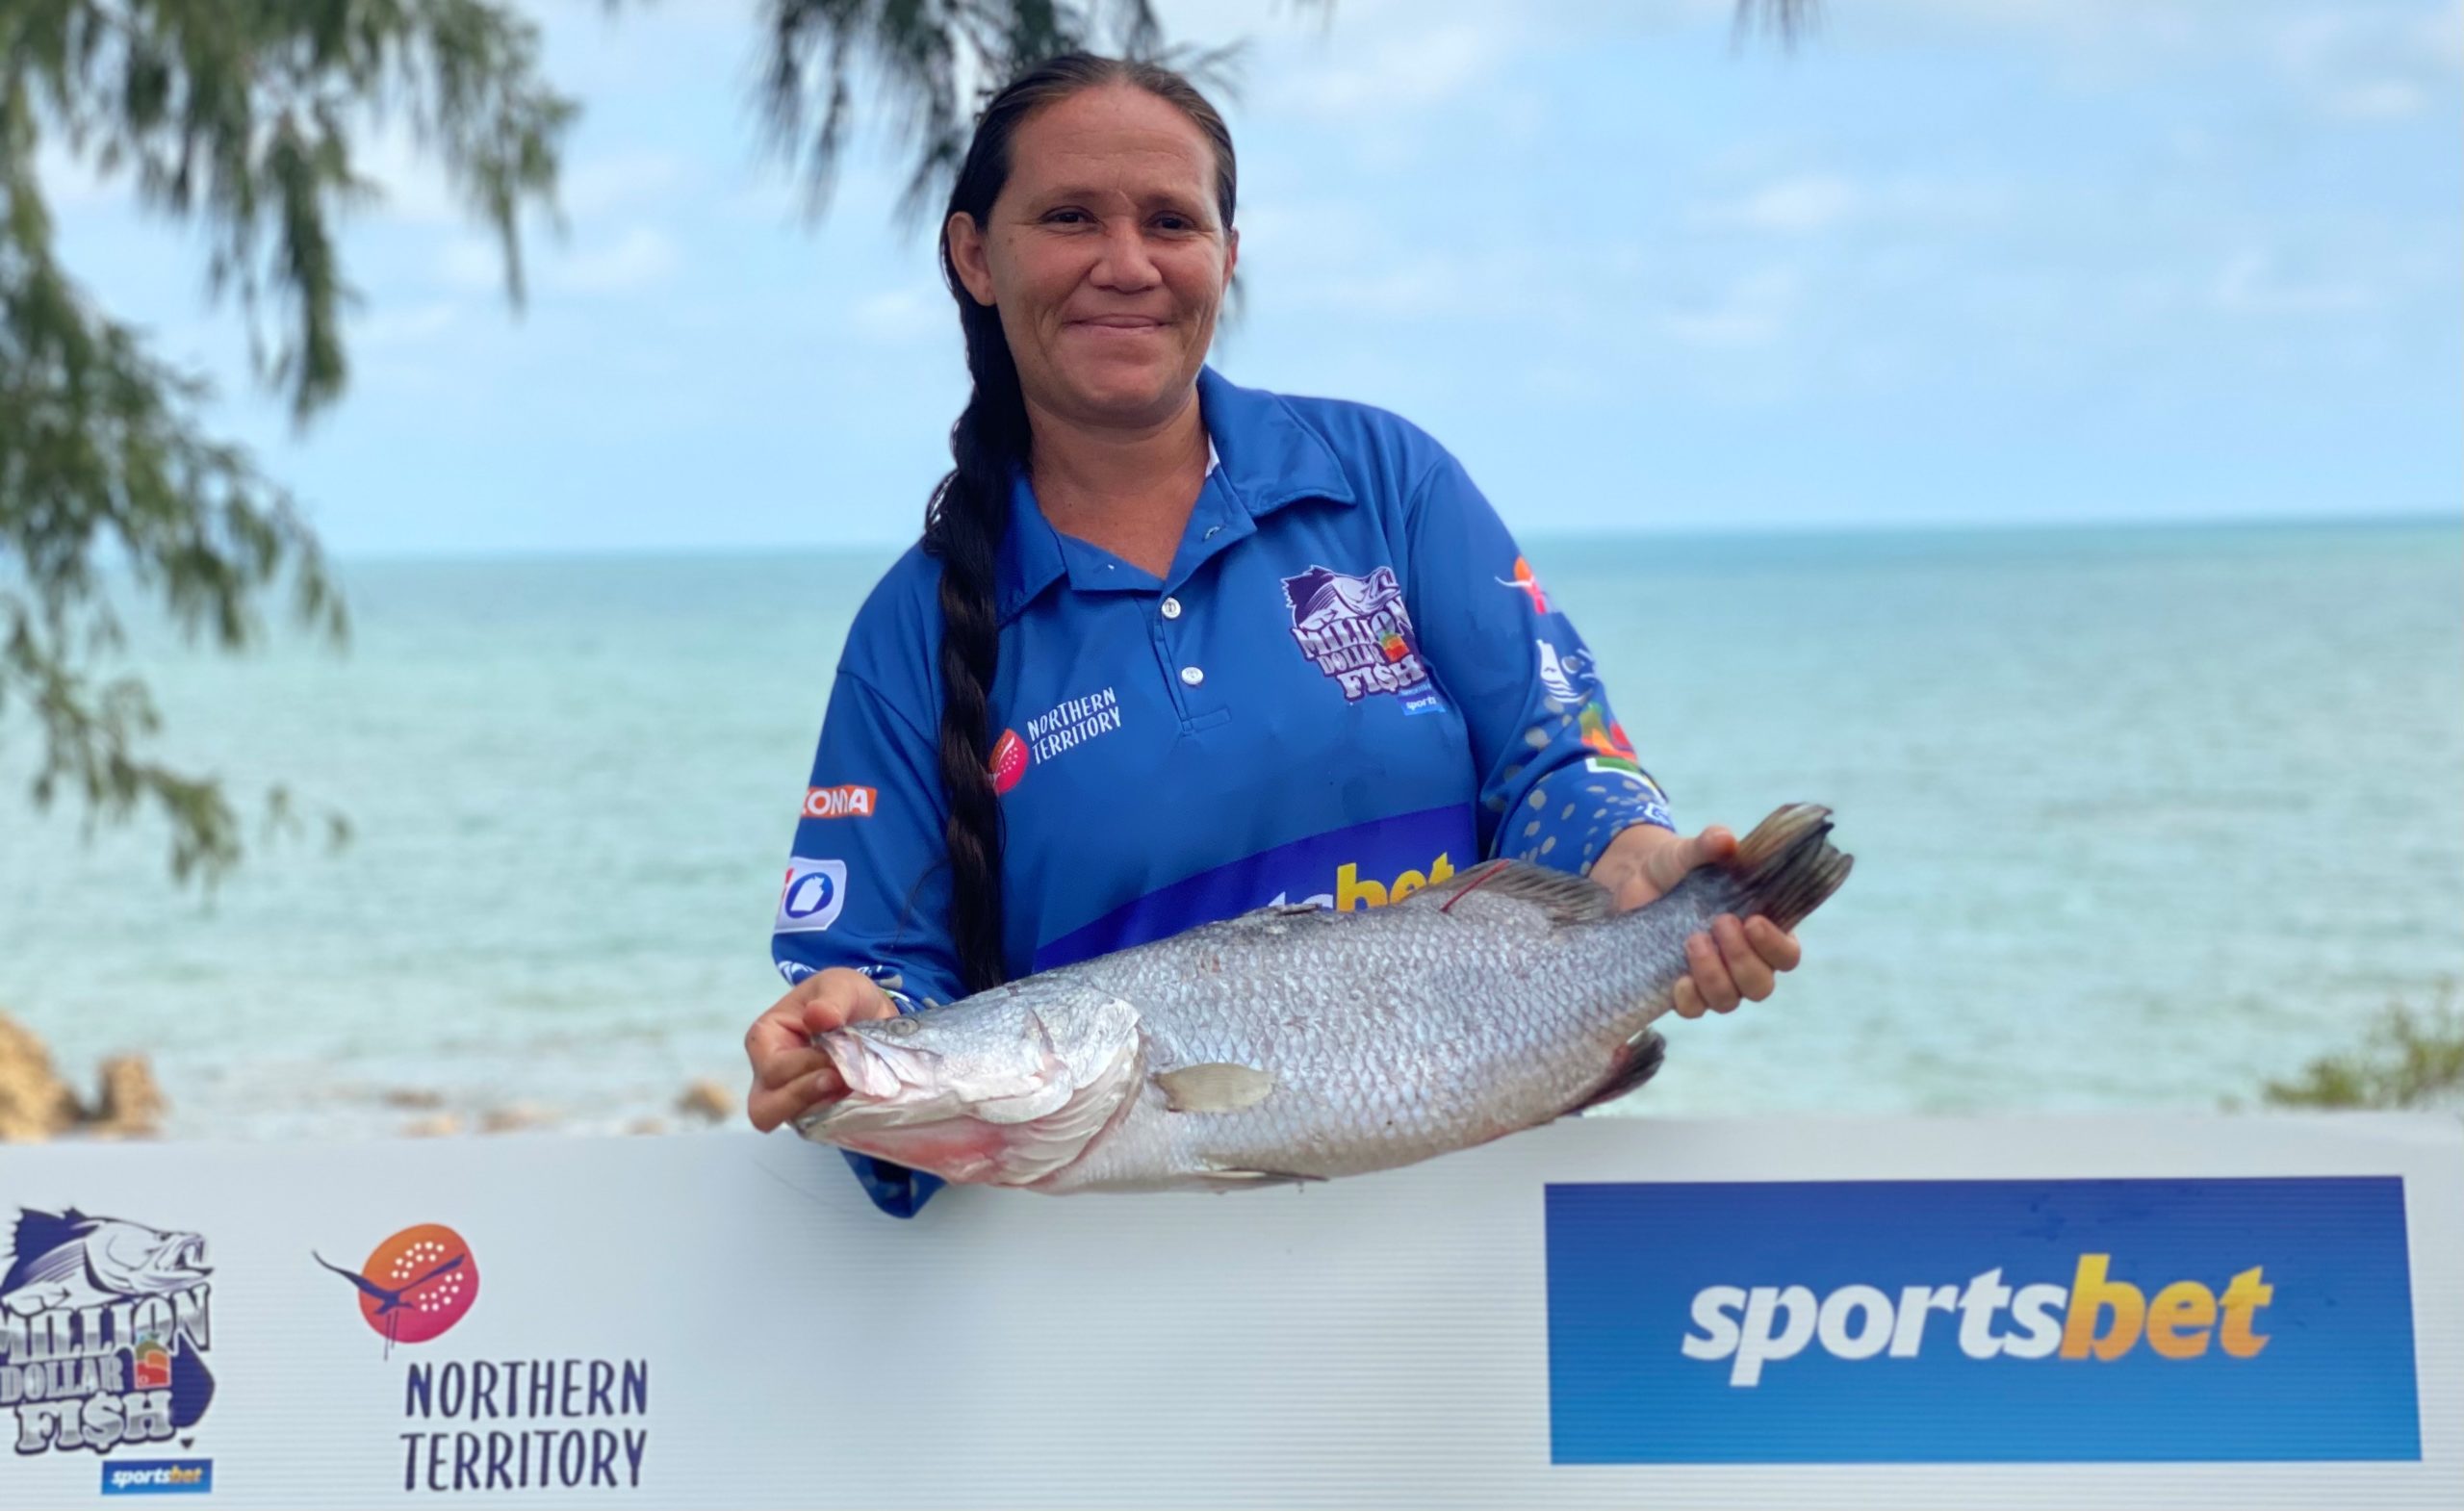 Female angler holding up $10,000 fish in front of cheque